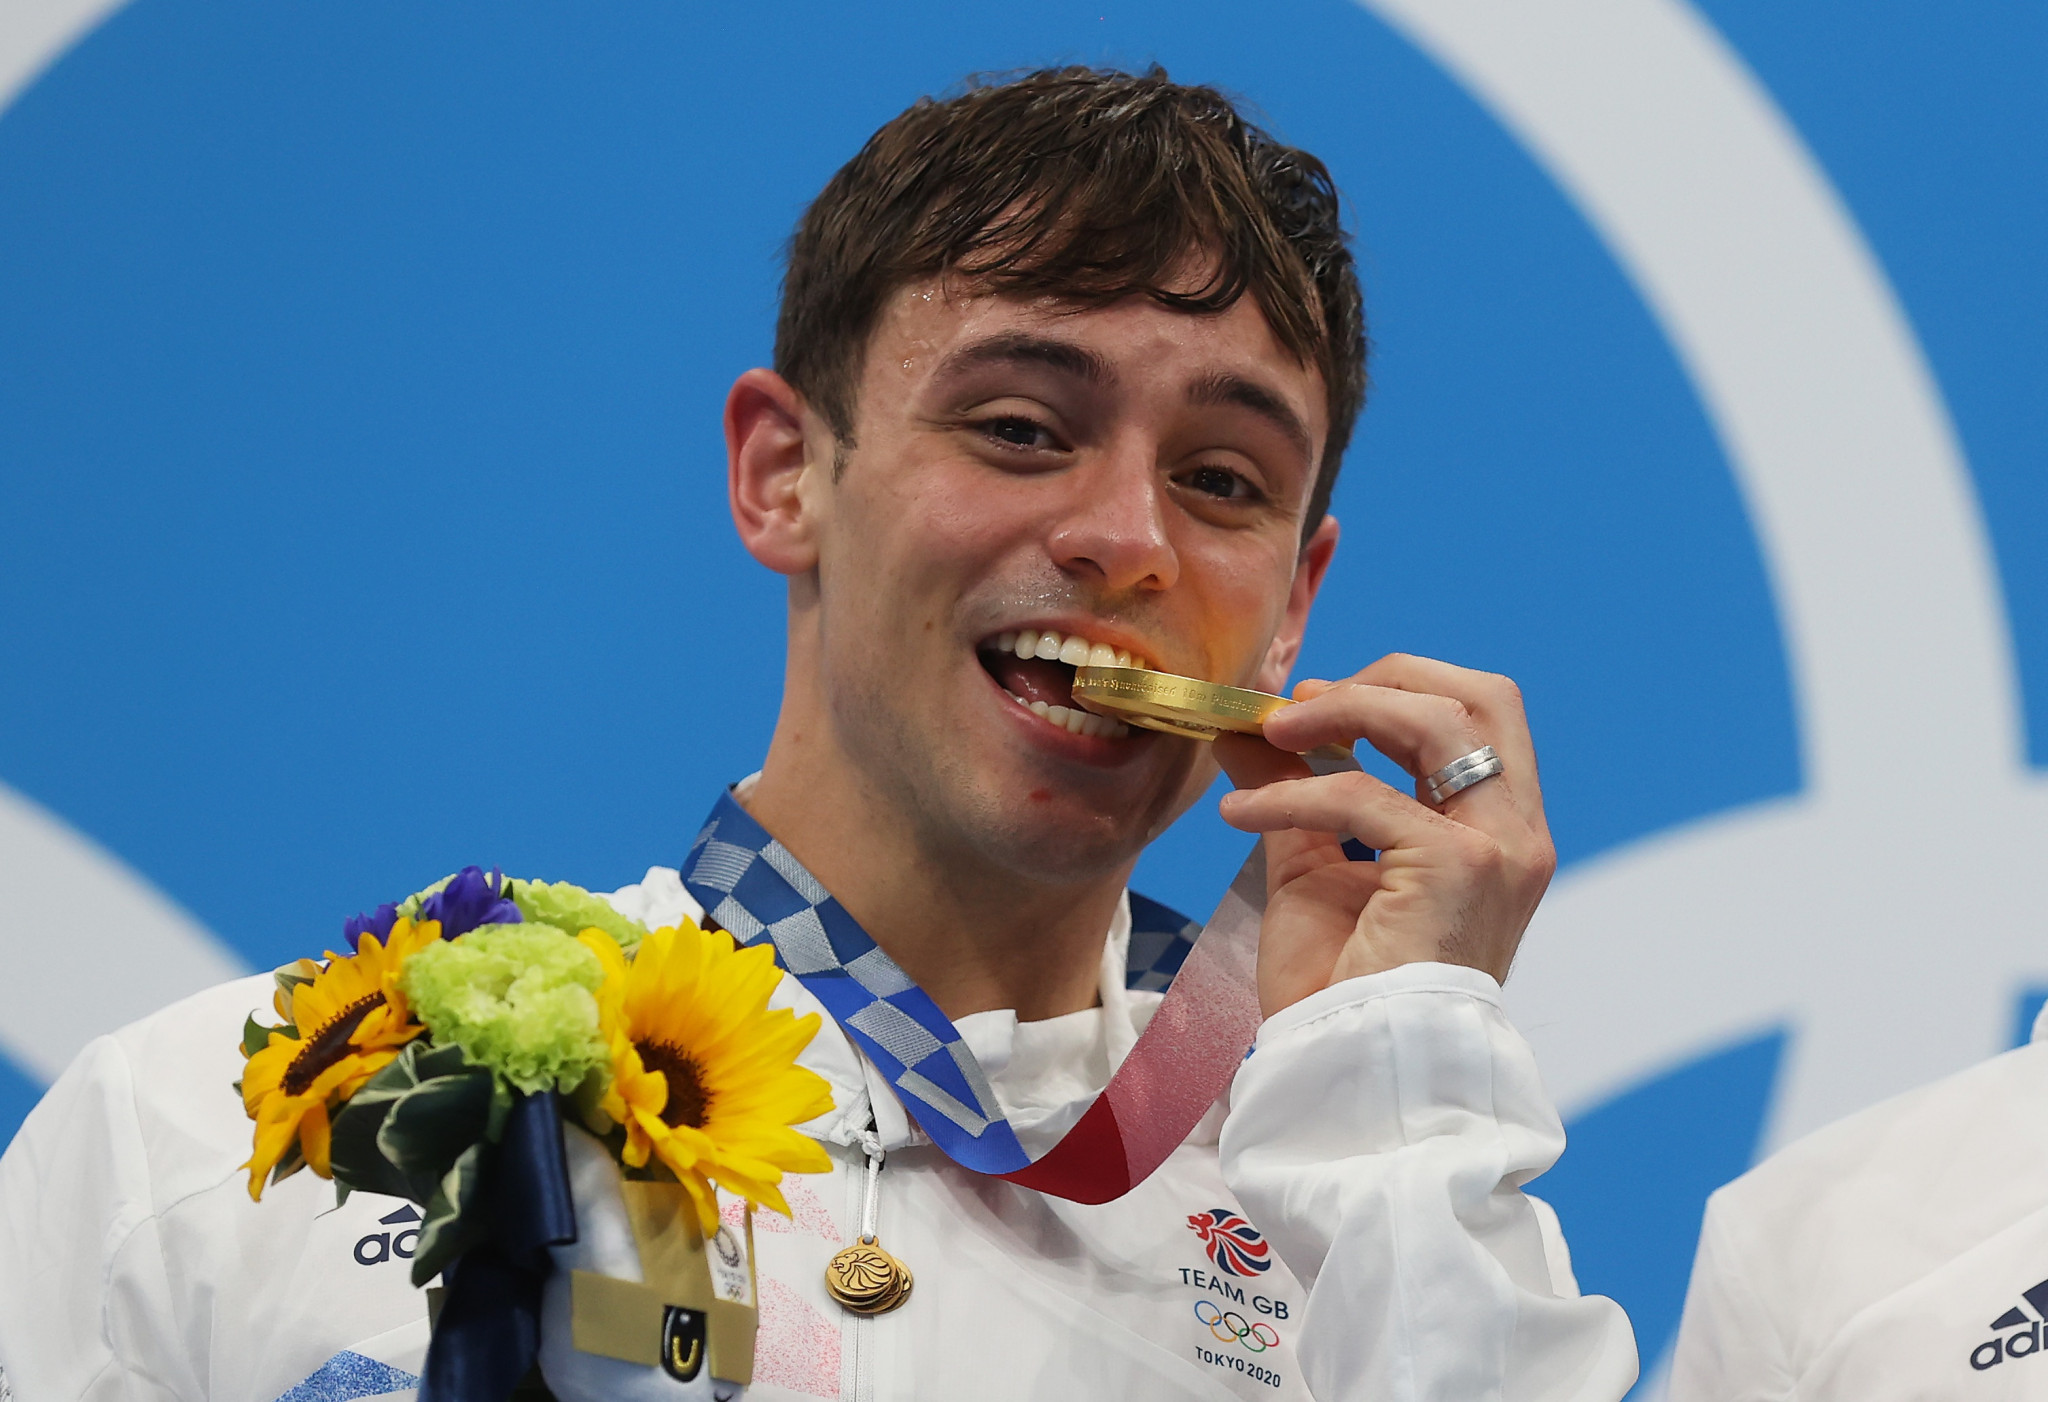 Daley due to make diving return with goal of competing at Paris 2024